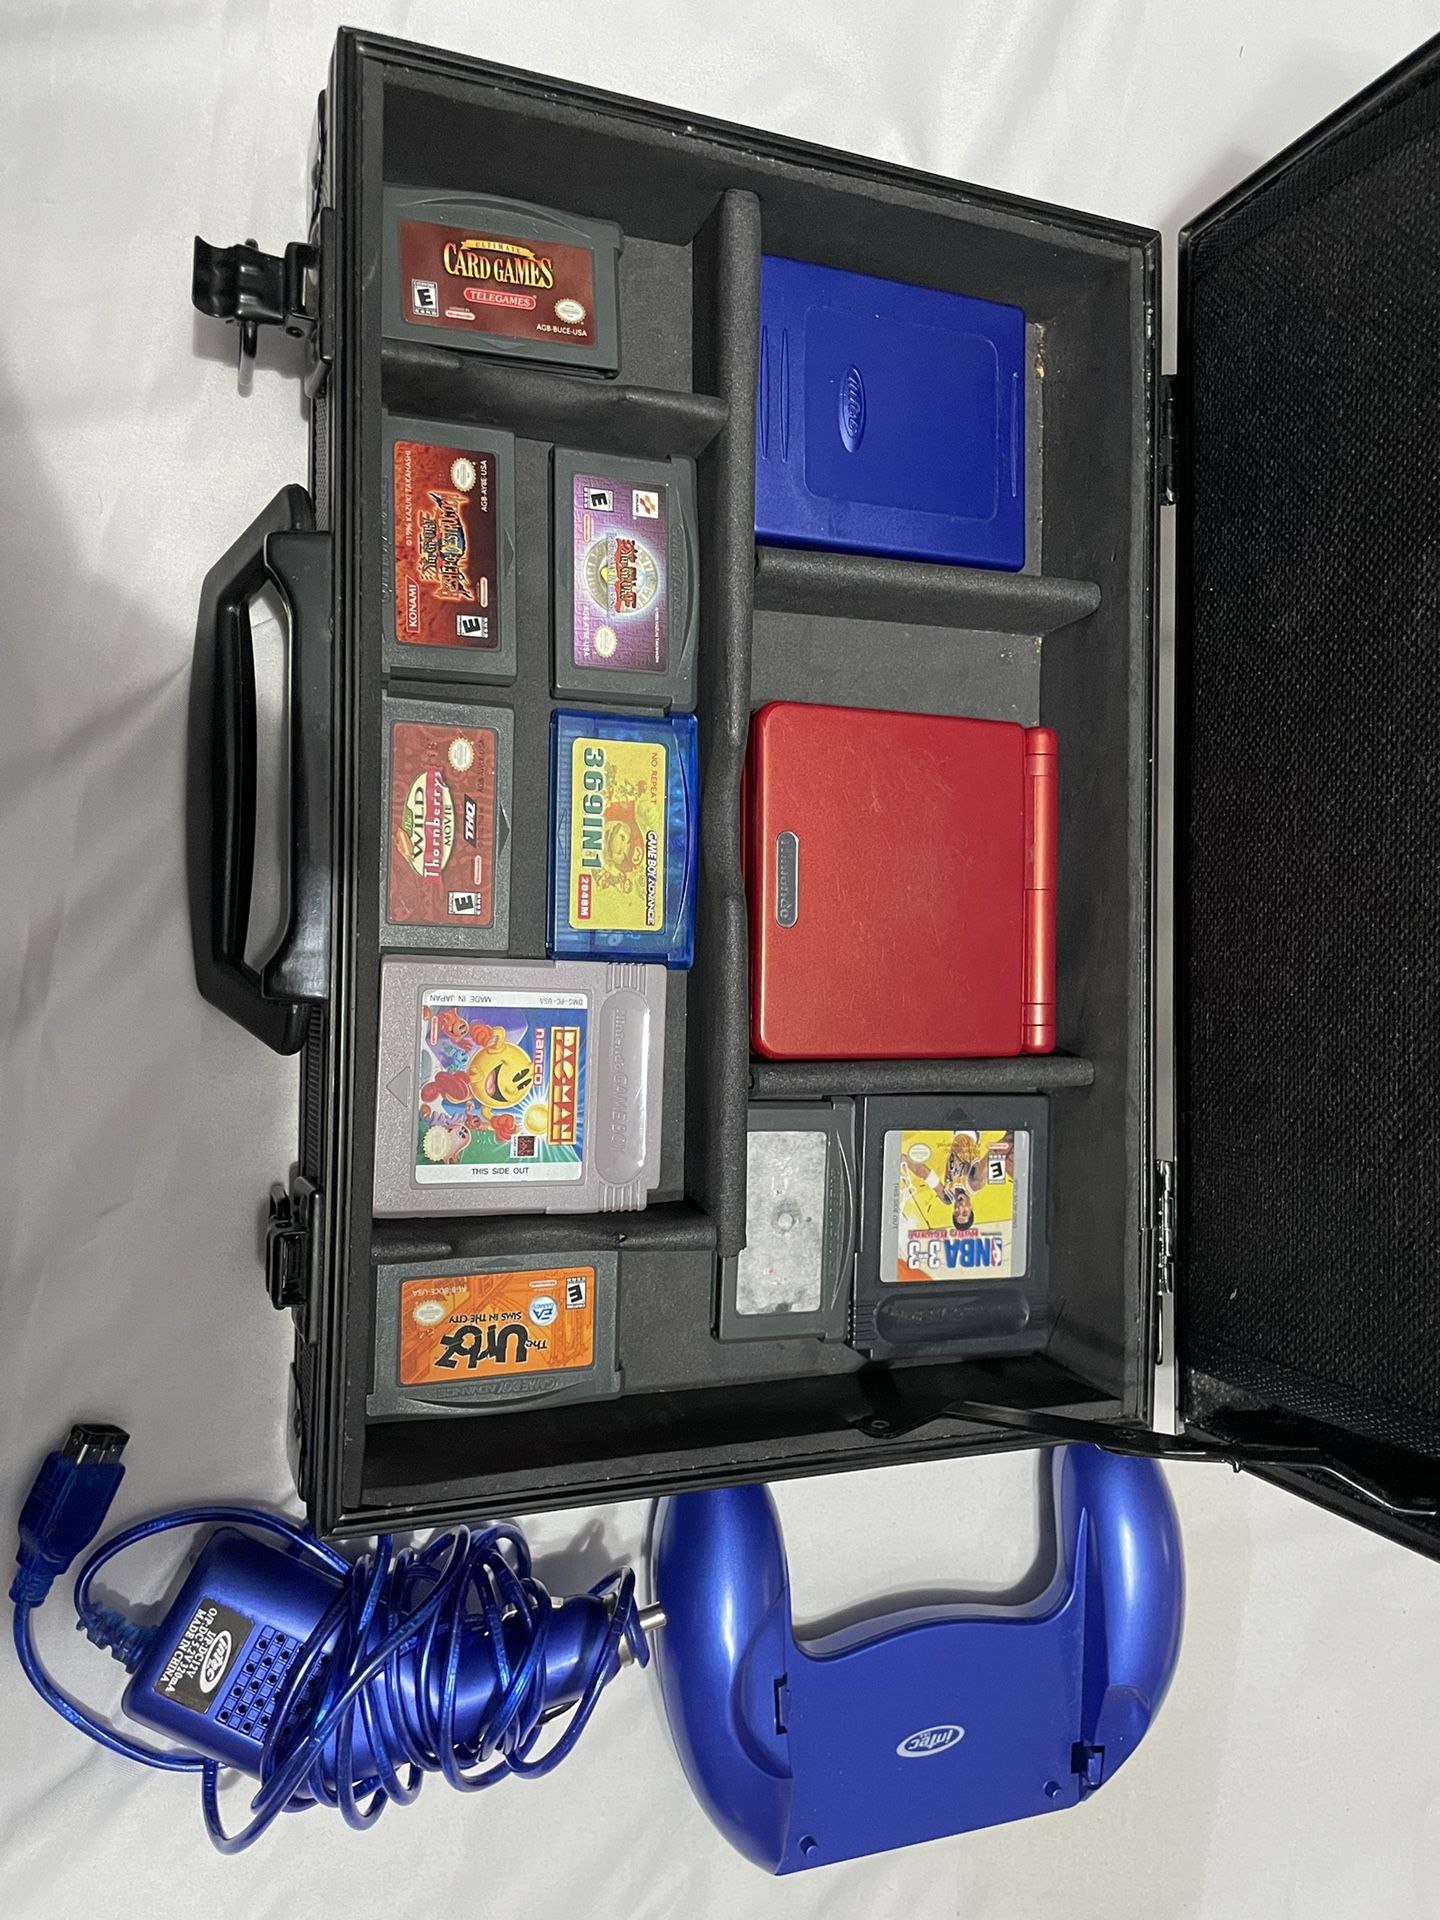 Gameboy advance sp with games, charger, game case and controller